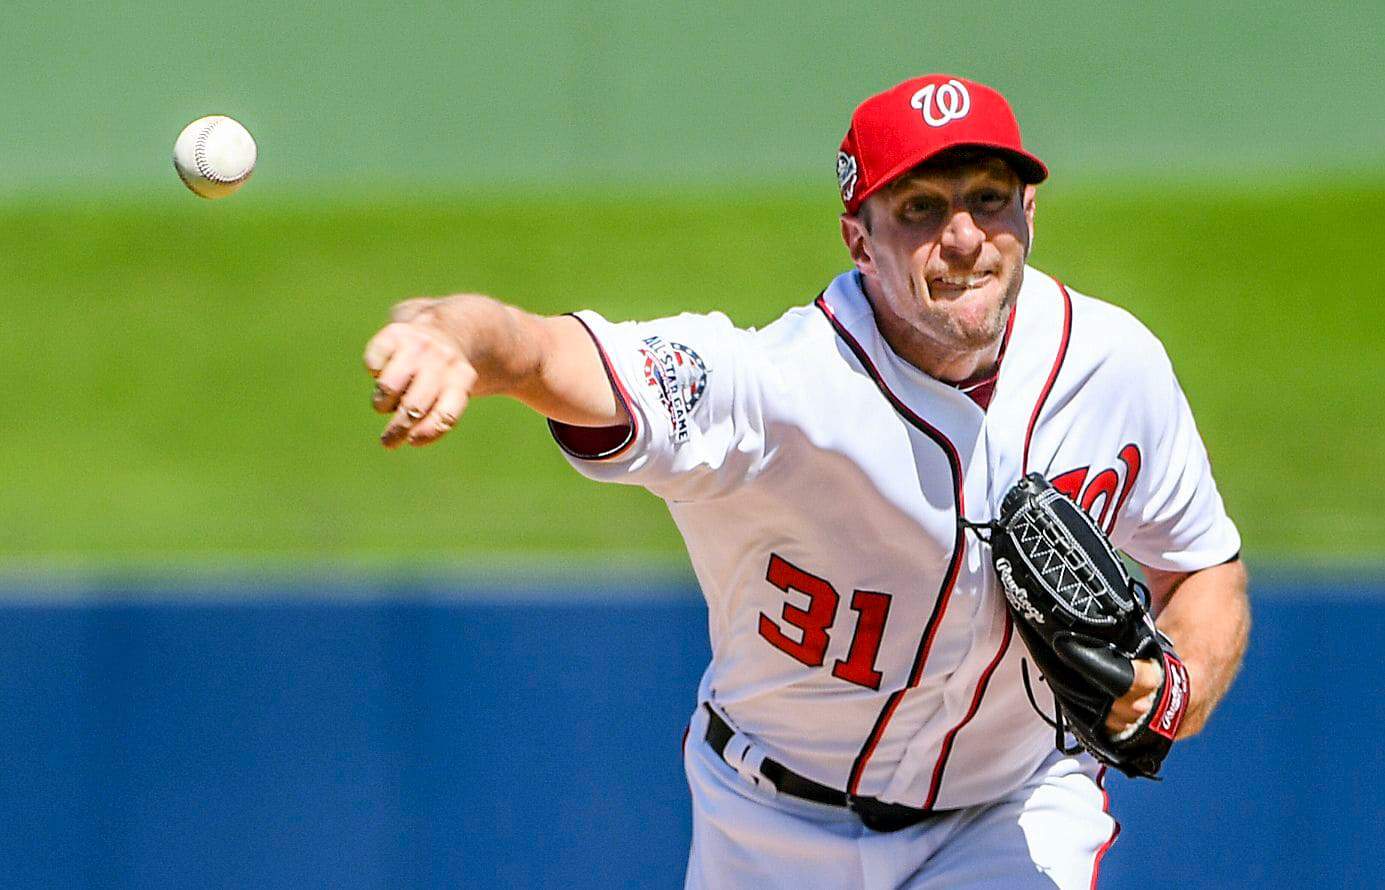 DraftKings MLB DFS cheatsheet for 9/2/20, picks like Max Scherzer based on projections and ownership from the world's No. 1 DFS player